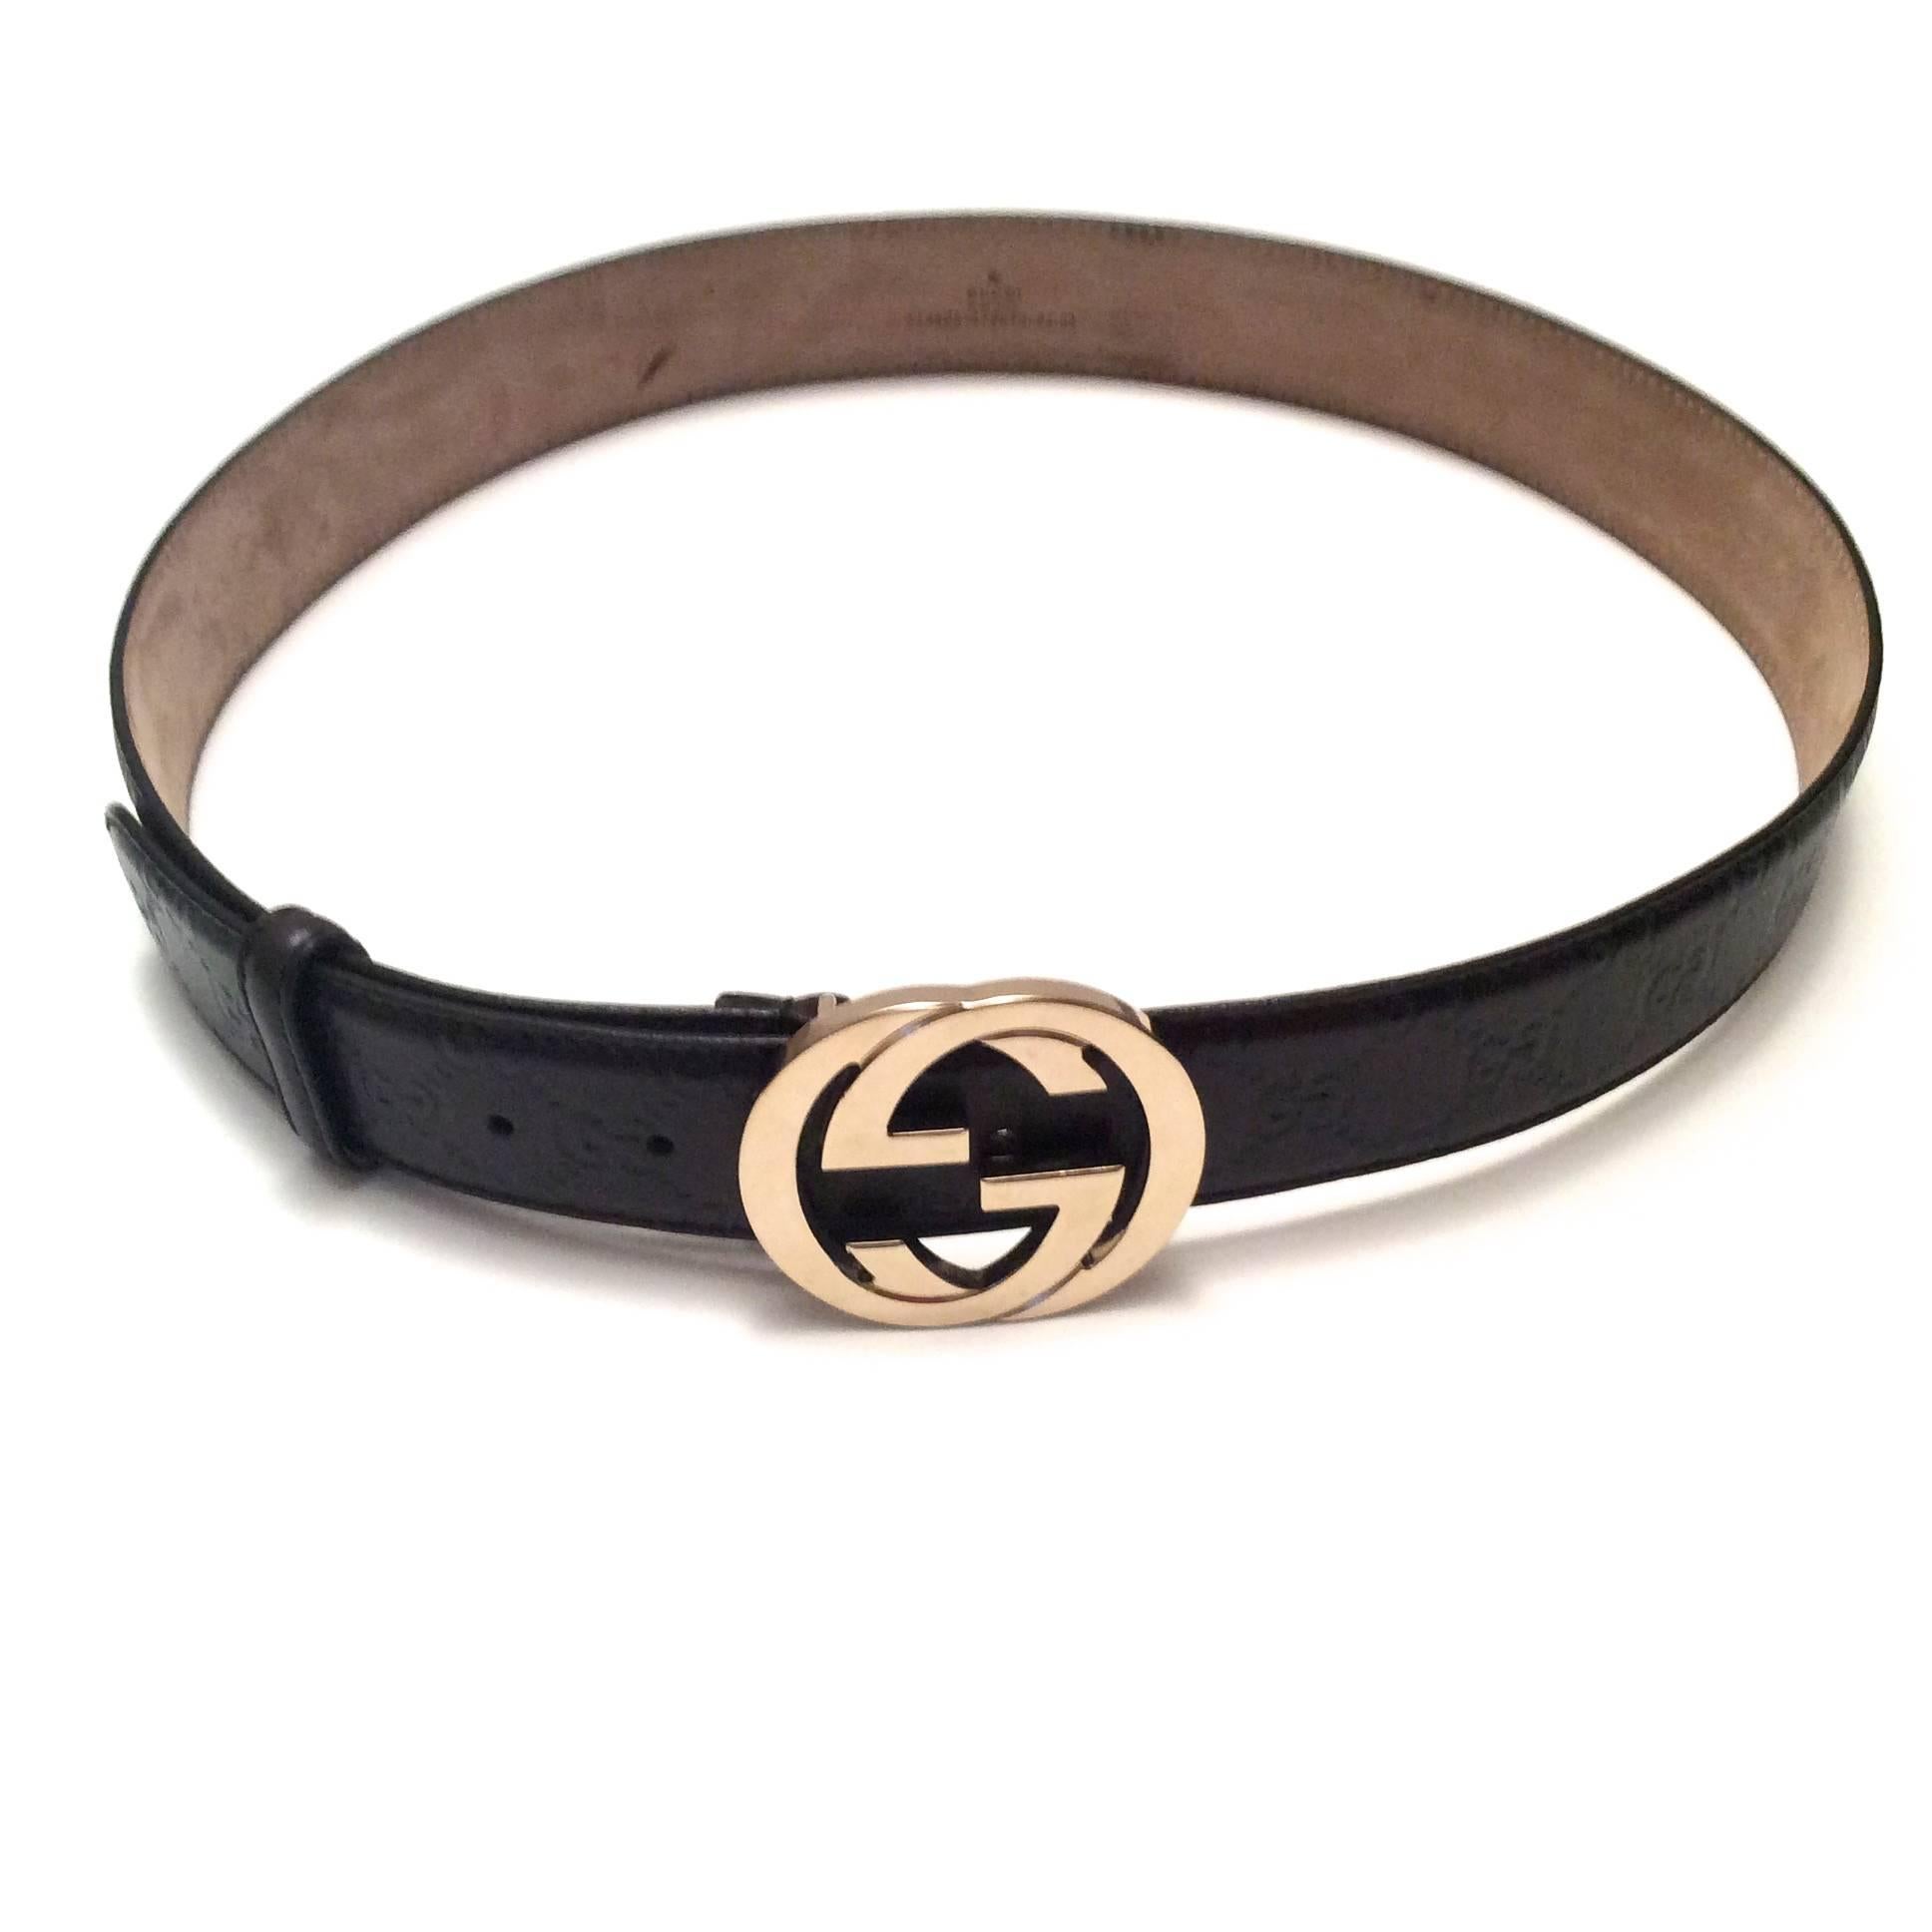 Presented here is a men's Gucci brown leather belt. This belt is a staple for every wardrobe. The belt is brown leather that is embossed with the classic Gucci insignia throughout the leather of the belt. The buckle is the classic interlocking 'G'